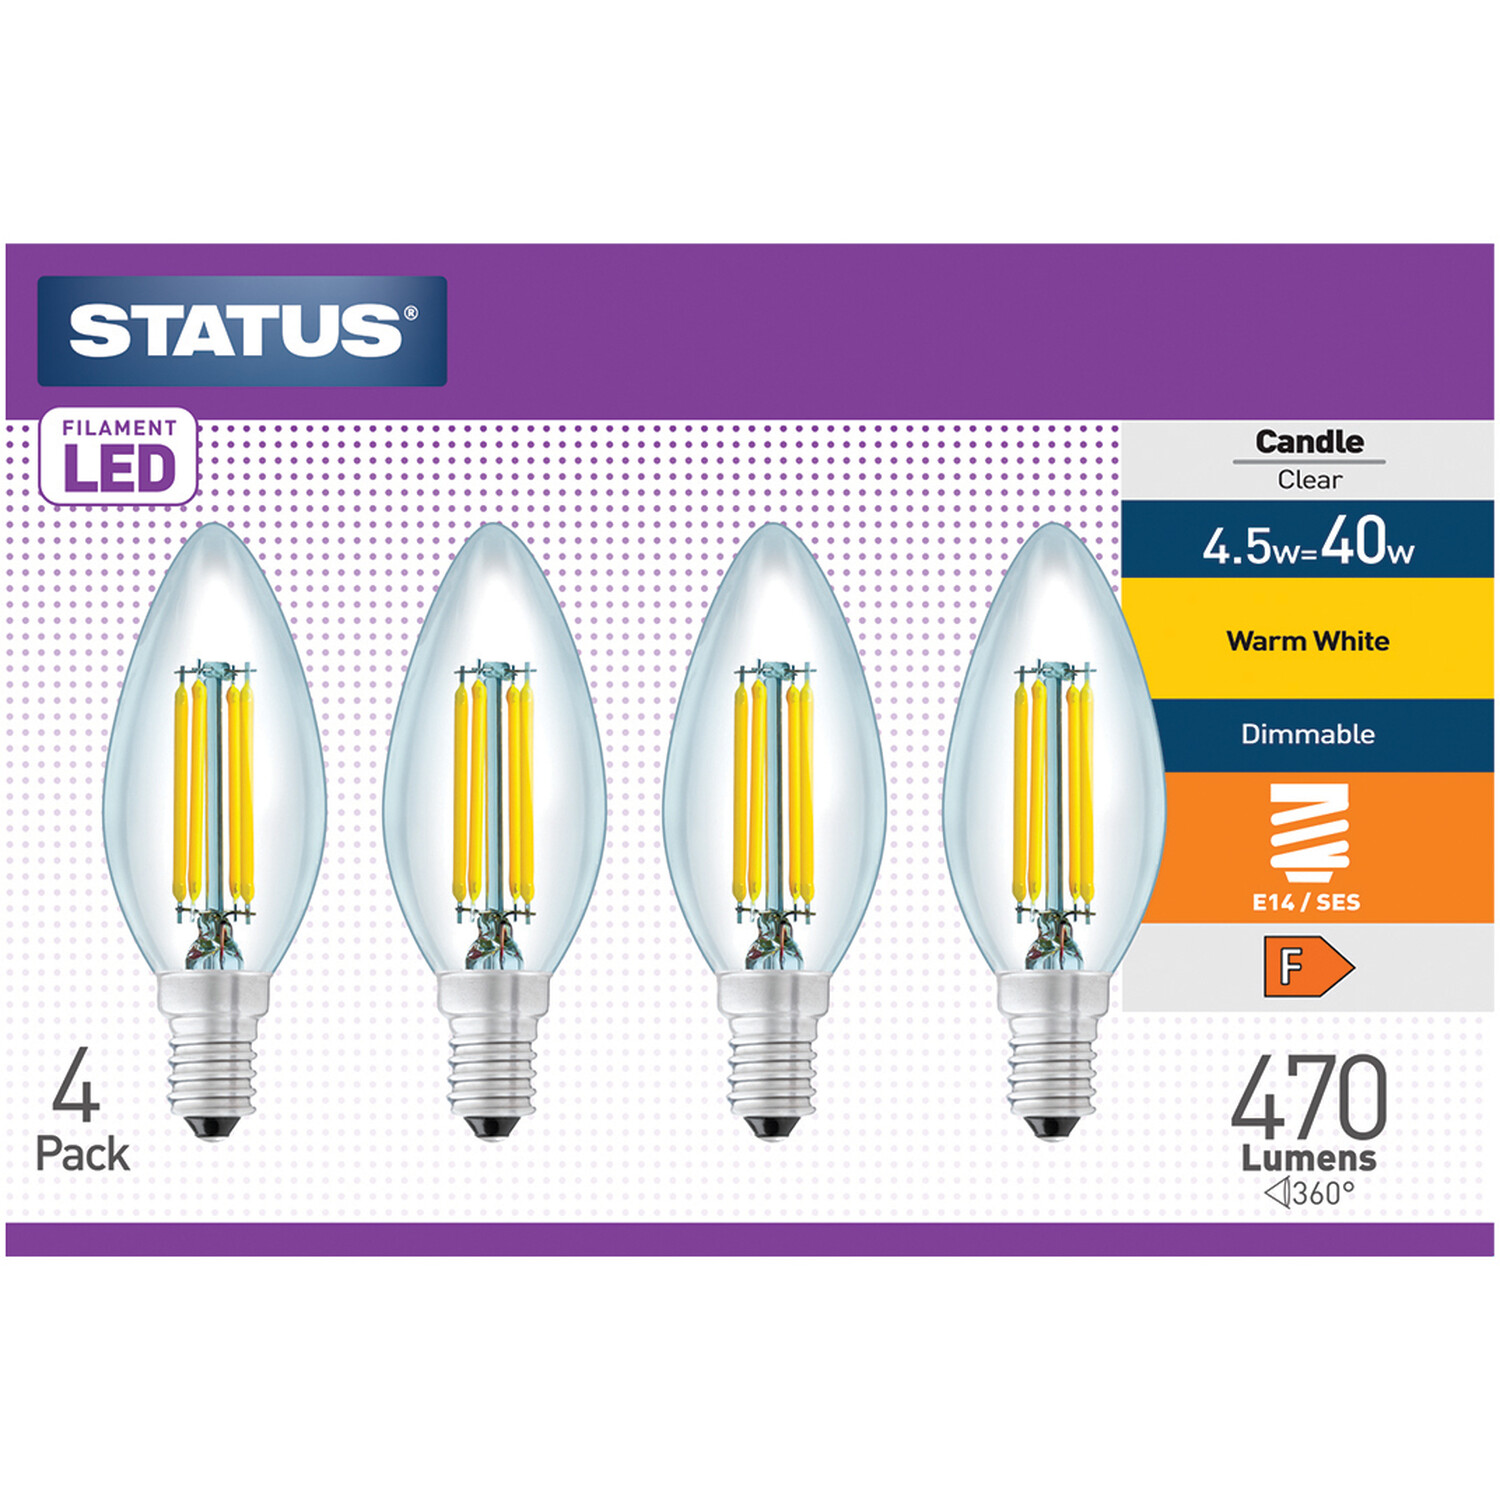 Pack of 4 Status Filament LED Dimmable Clear Candle Bulbs Image 1